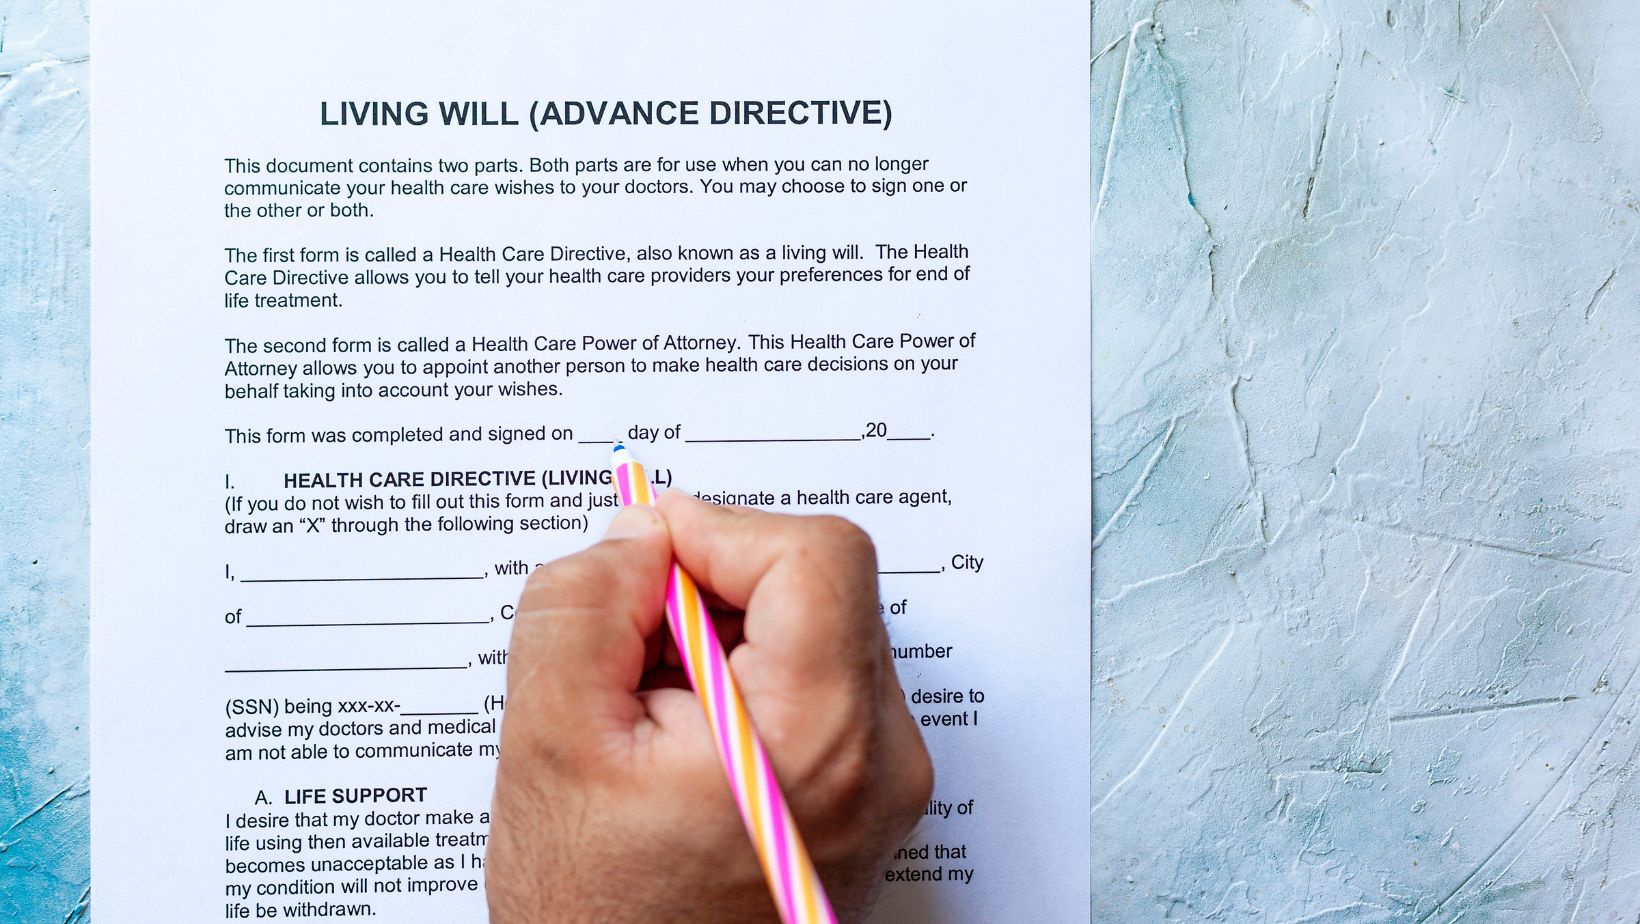 which of the following statements is accurate concerning advance healthcare directives?